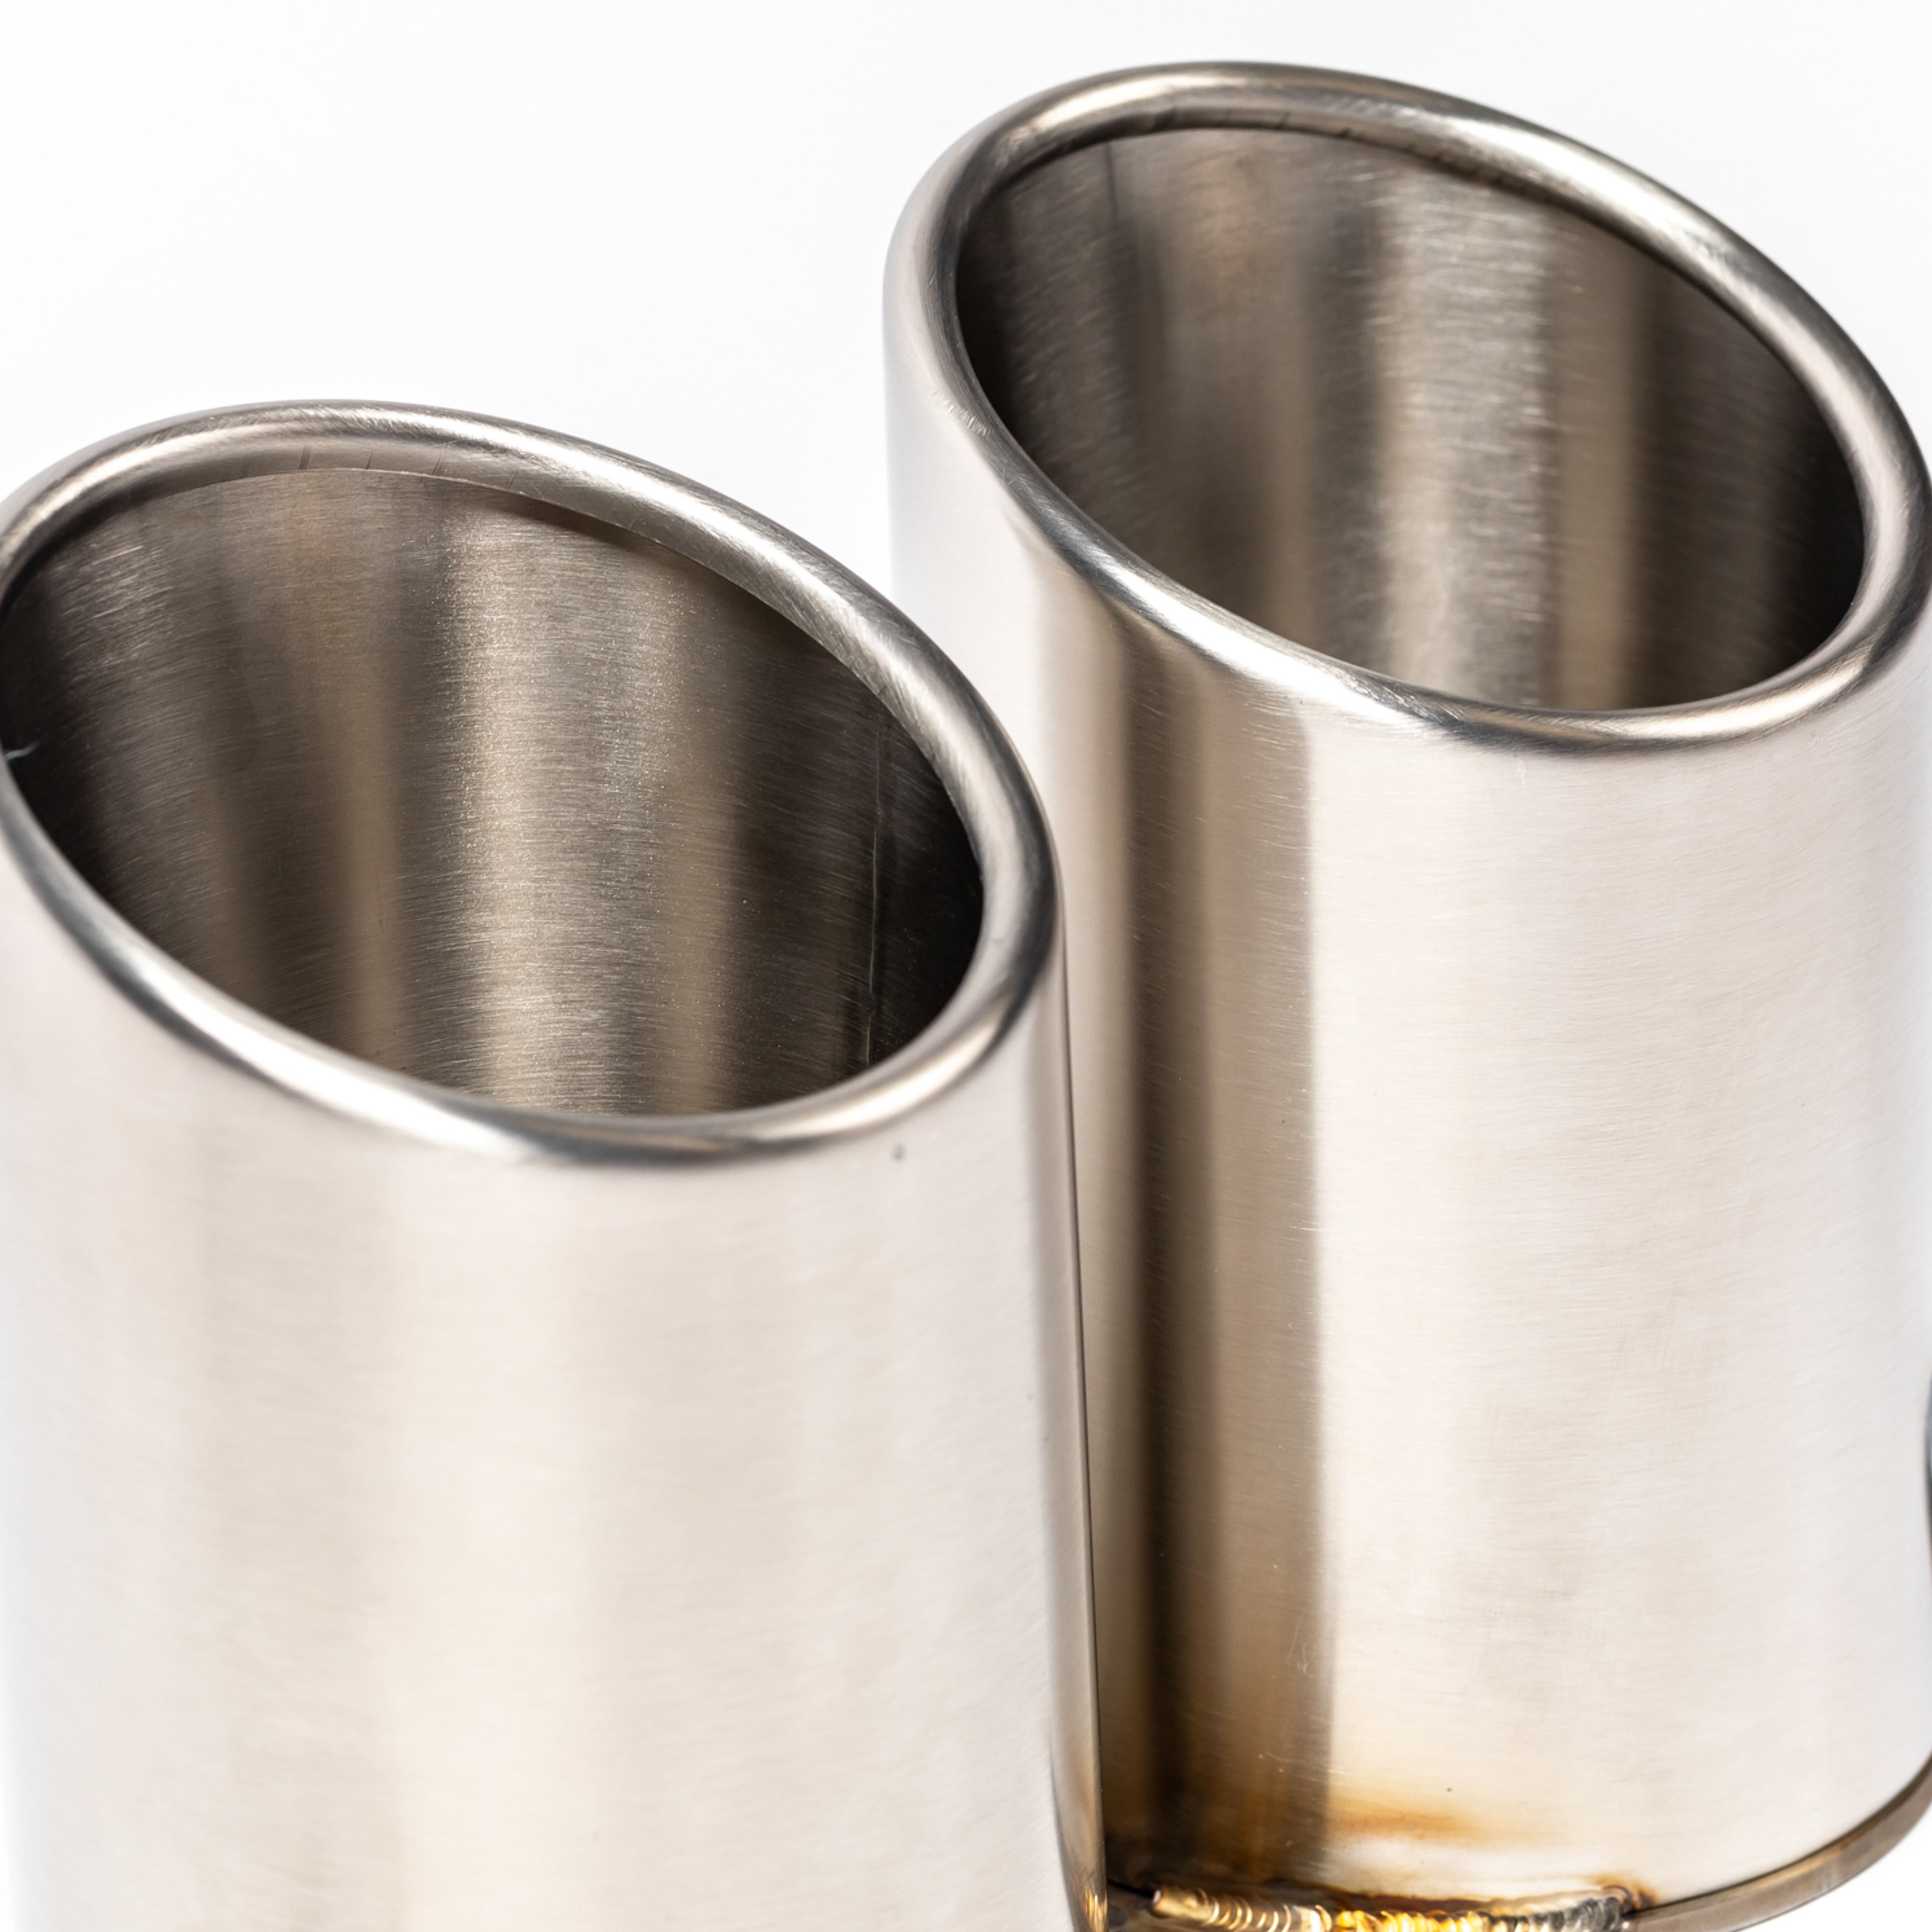 INCONEL ROLLED TIPS (POLISHED)